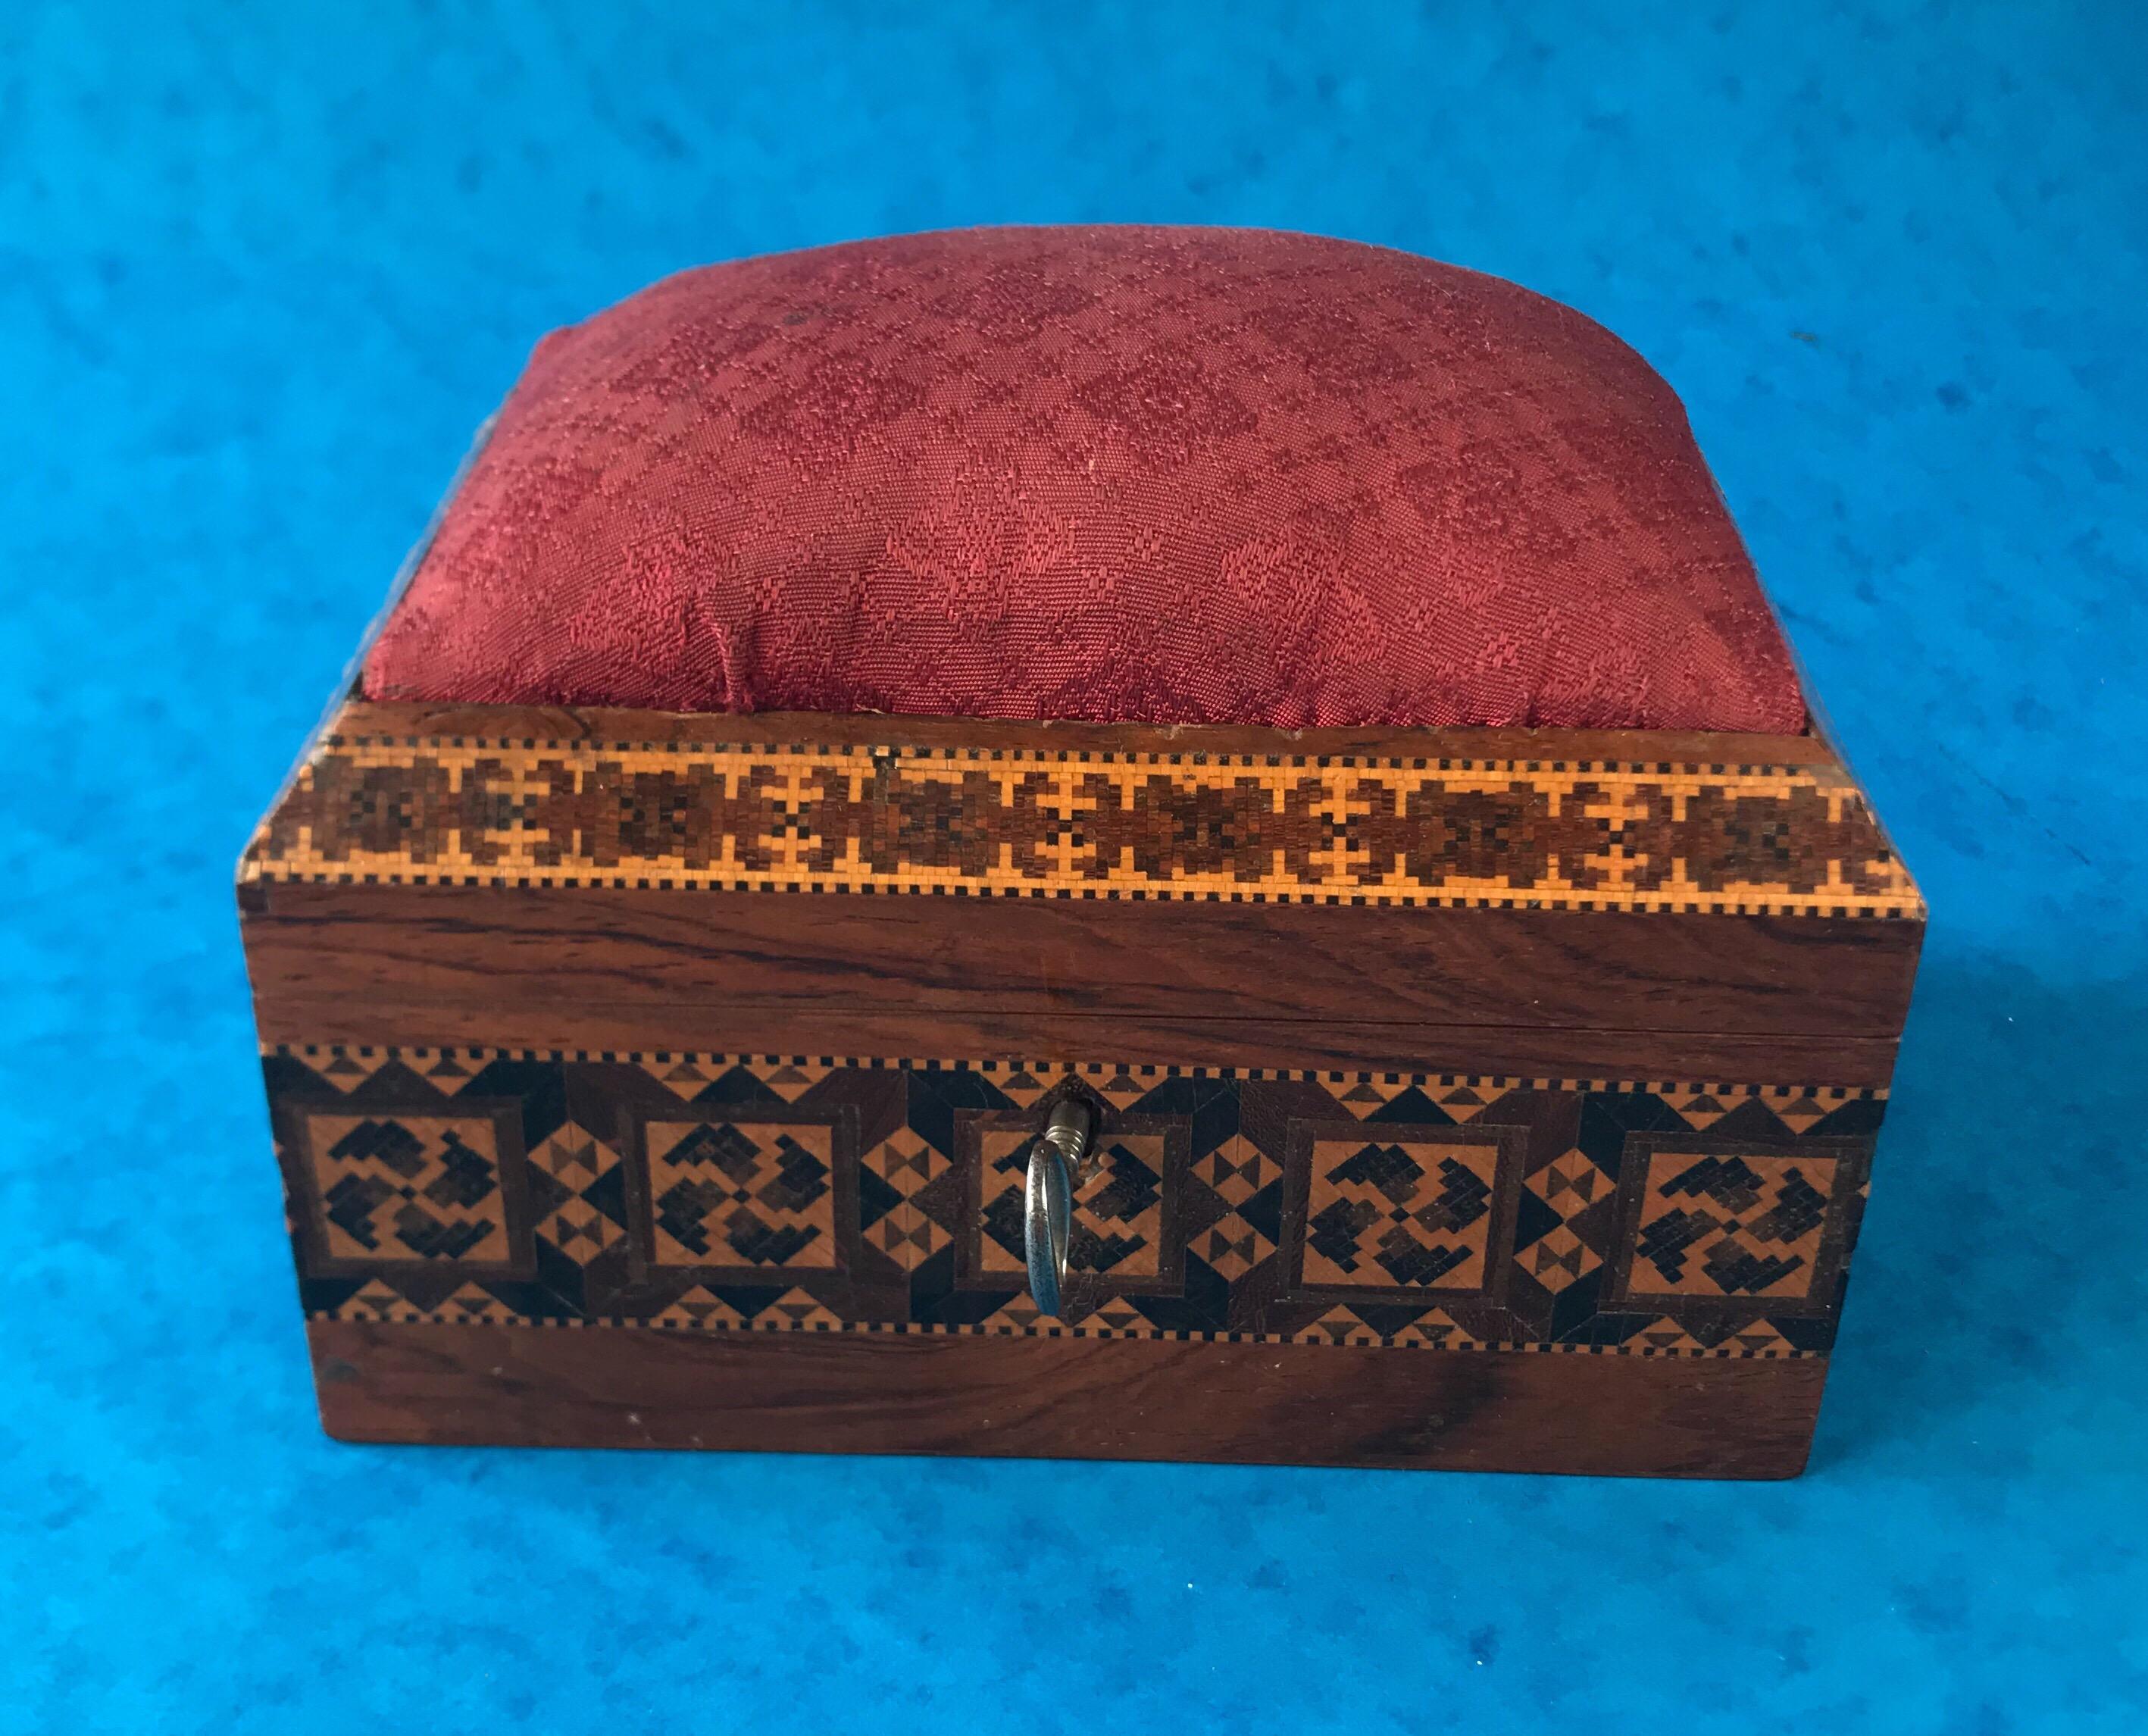 A Victorian 1845 Tunbridge Ware, stickware and mosaic sewing box, it has a red cushion top a working lock and key and its original interior. It measures 16 by 10.5 and stands 15 cm high.

